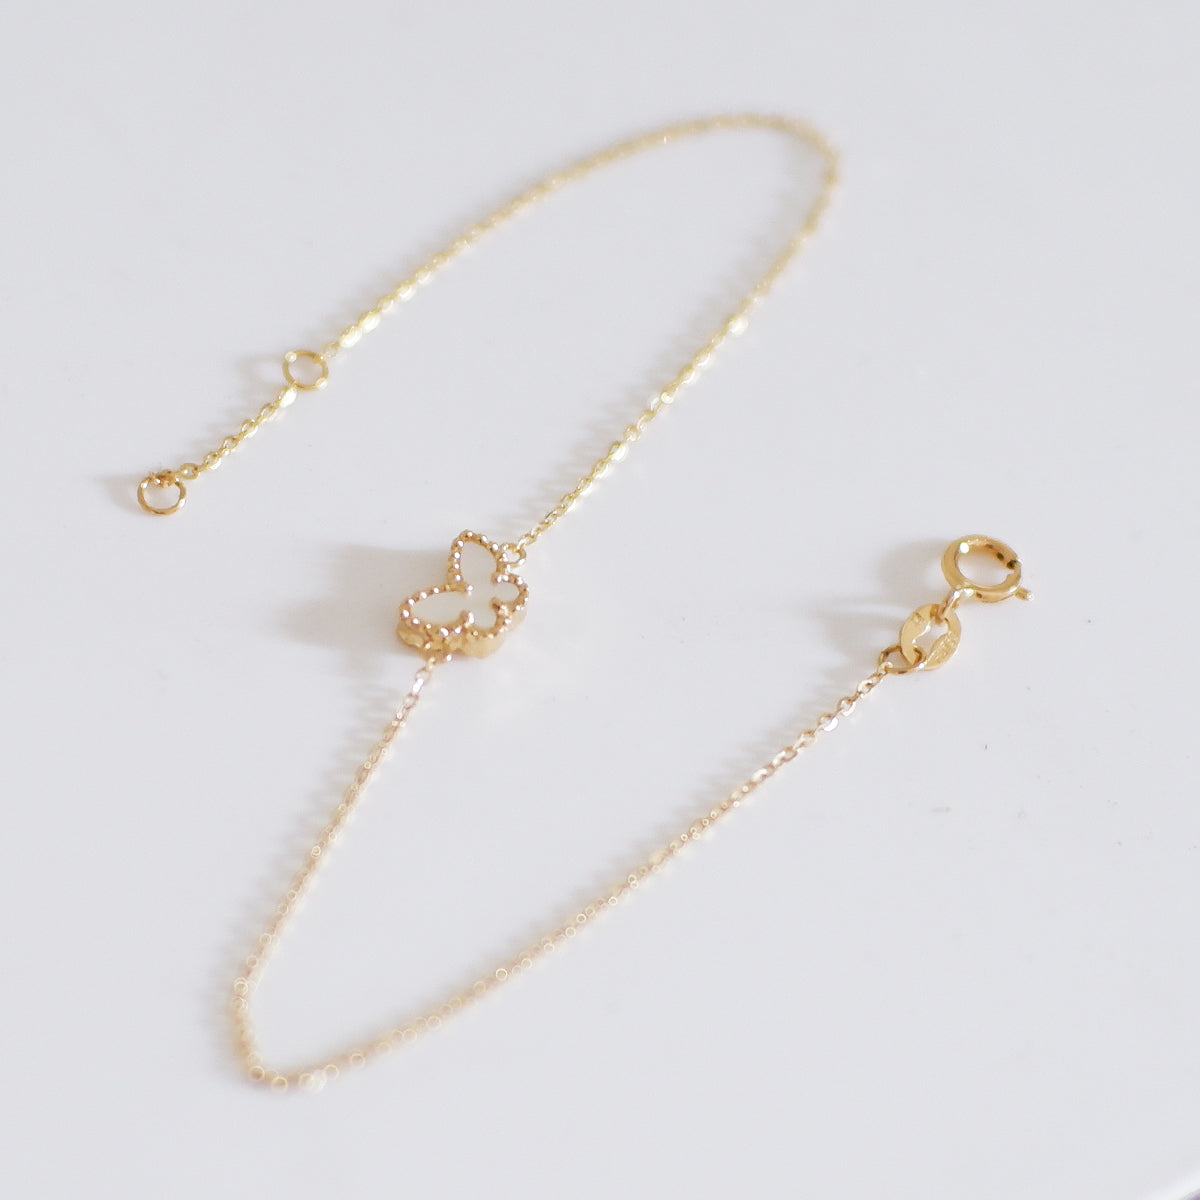 The Rare Mini Pearl Butterfly Bracelet / Necklace in Solid Gold